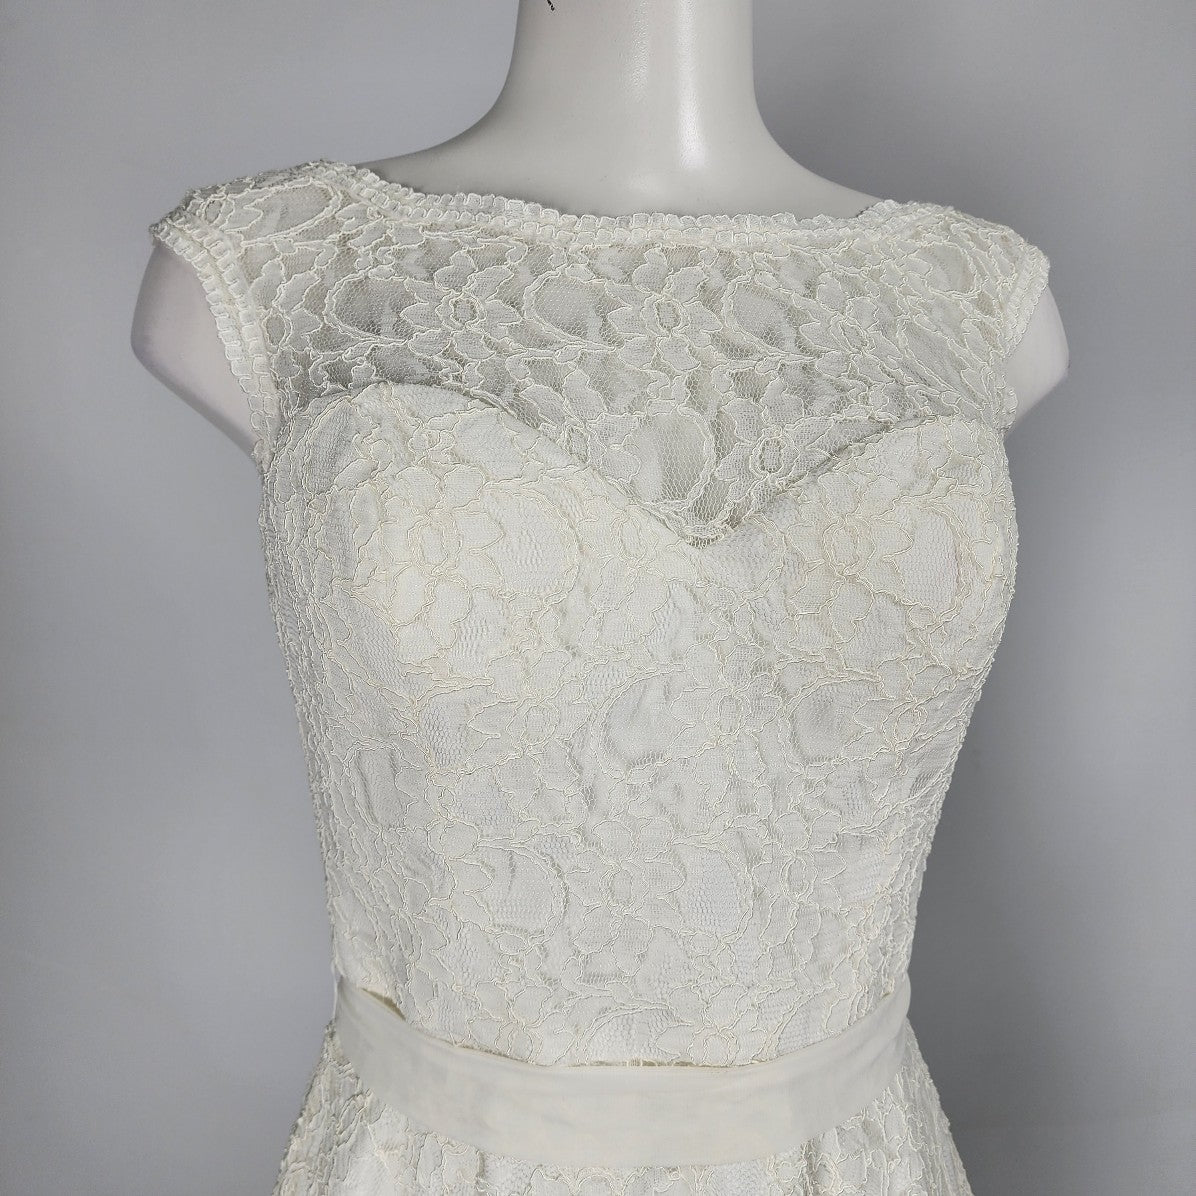 Mori Lee White Lace Fit & Flare Shorty Wedding Gown Size S/M